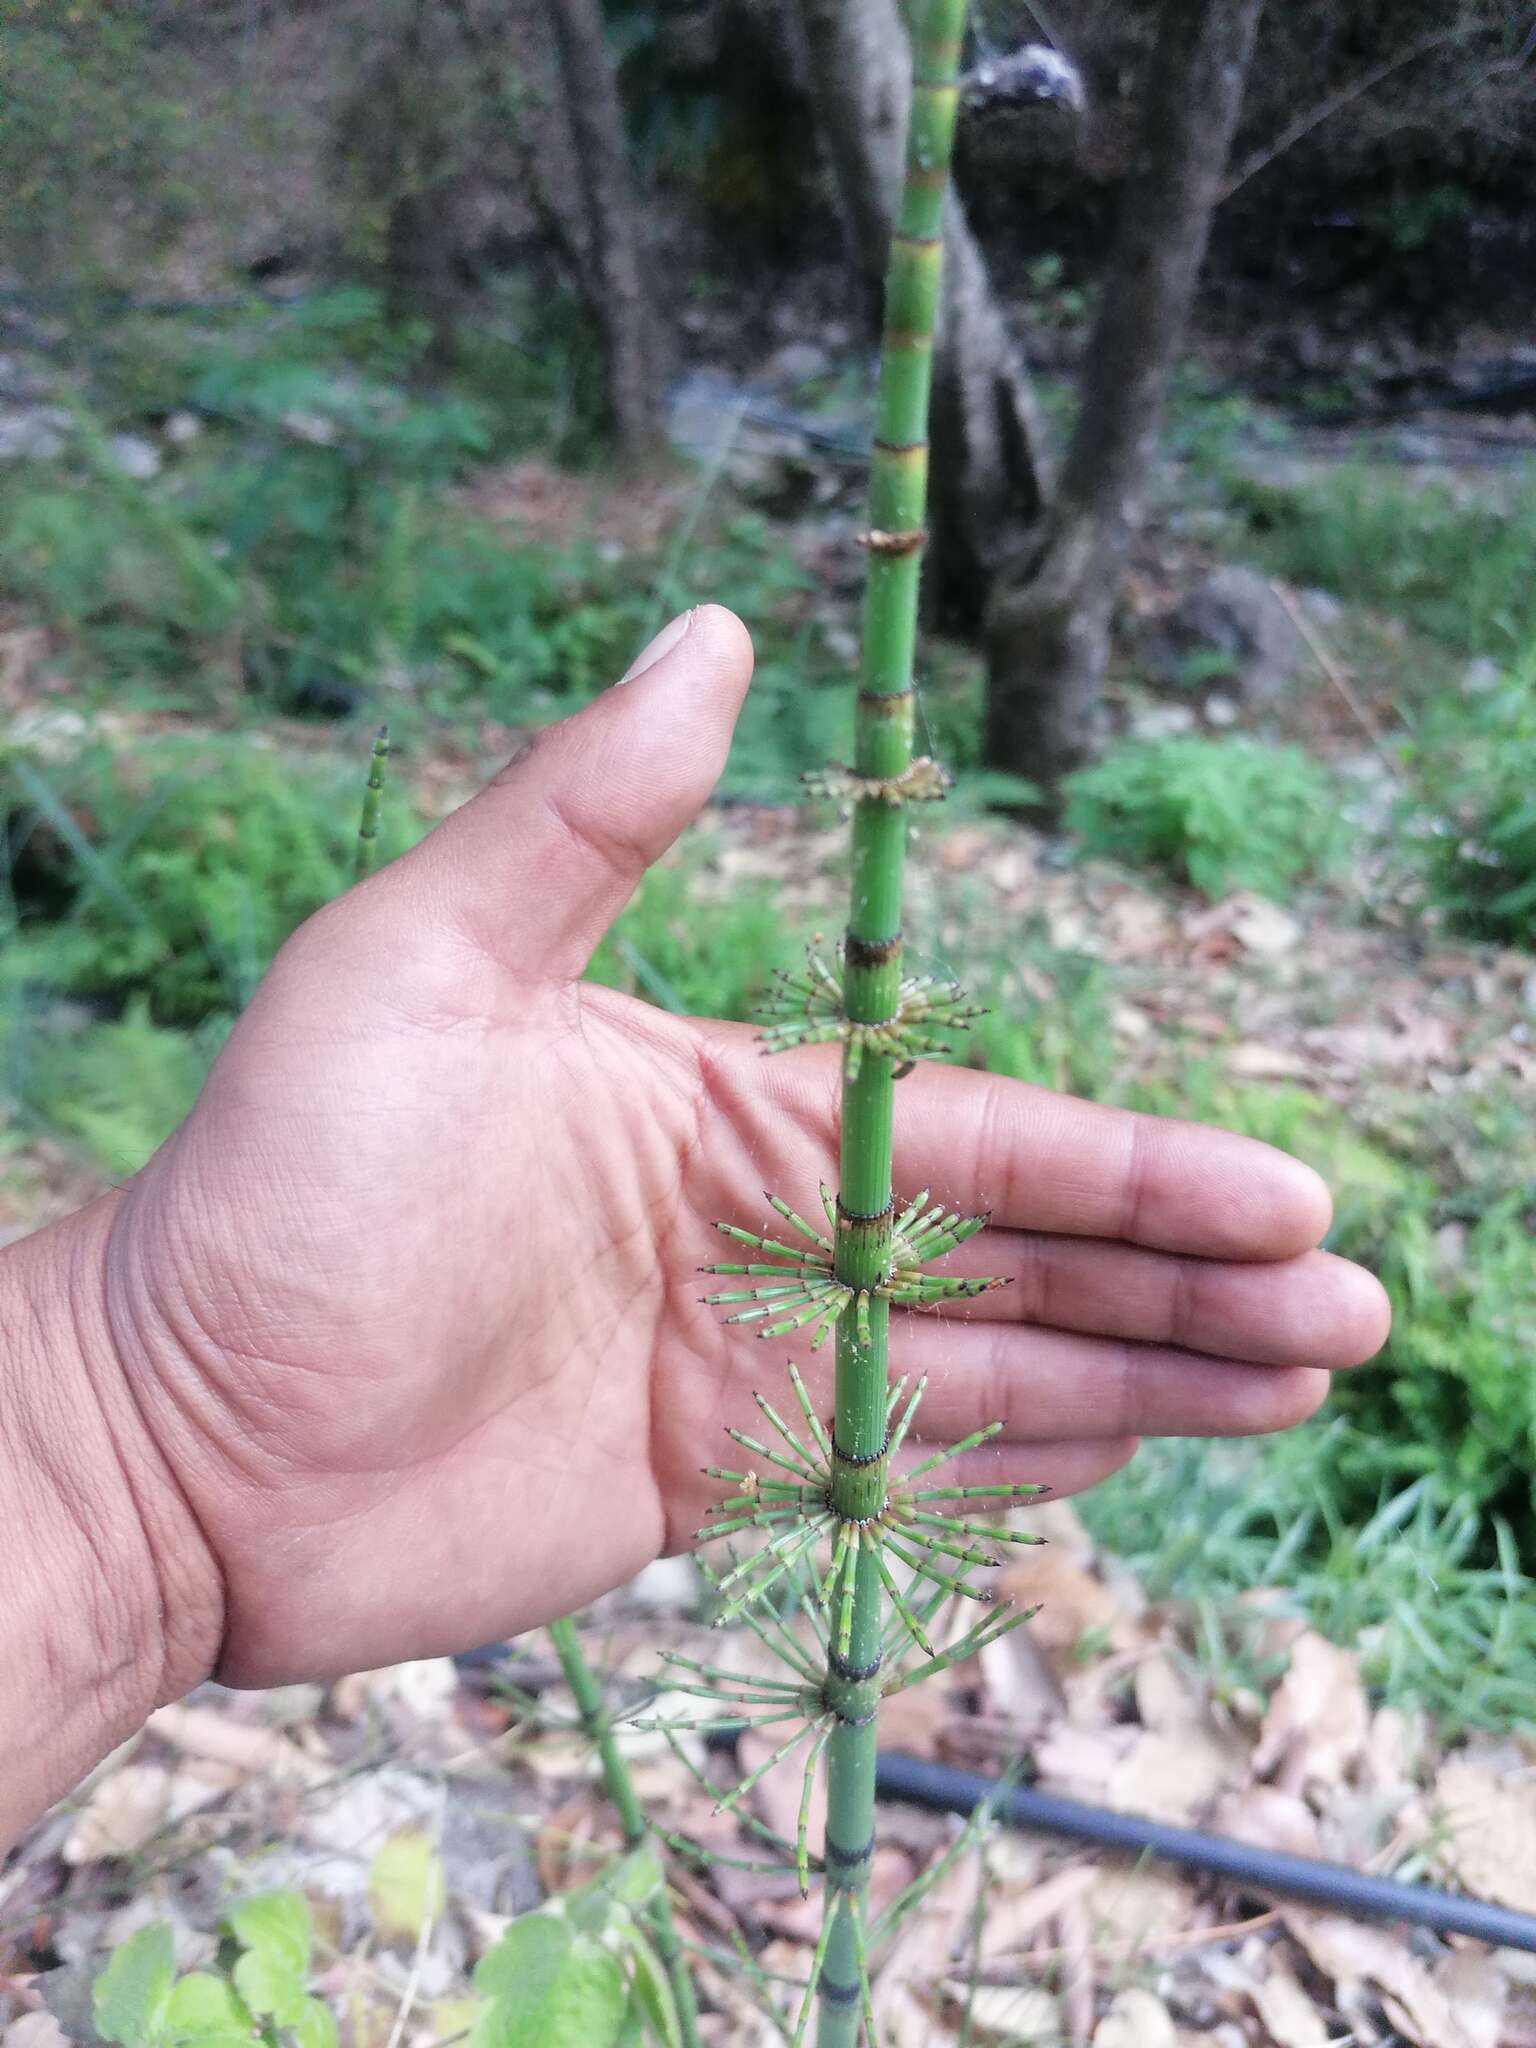 Image of Mexican Giant Horsetail